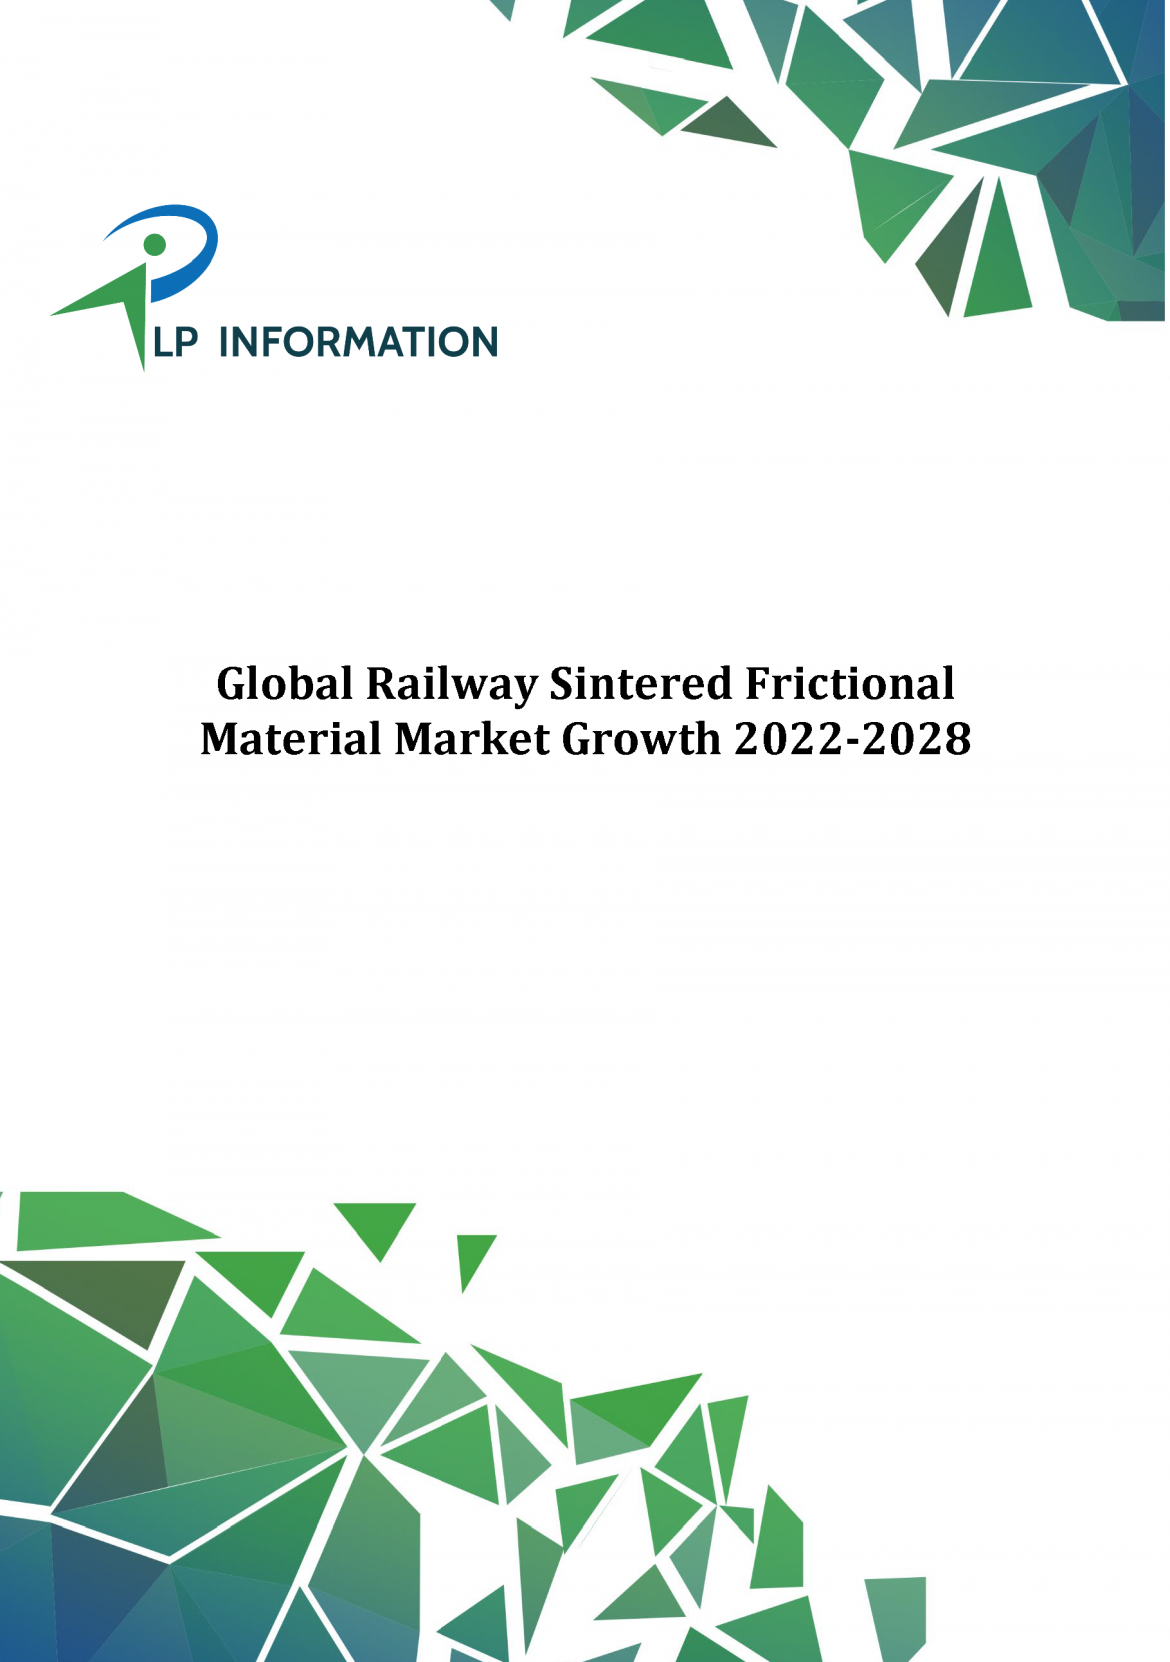 Global Railway Sintered Frictional Material Market Growth 2022-2028